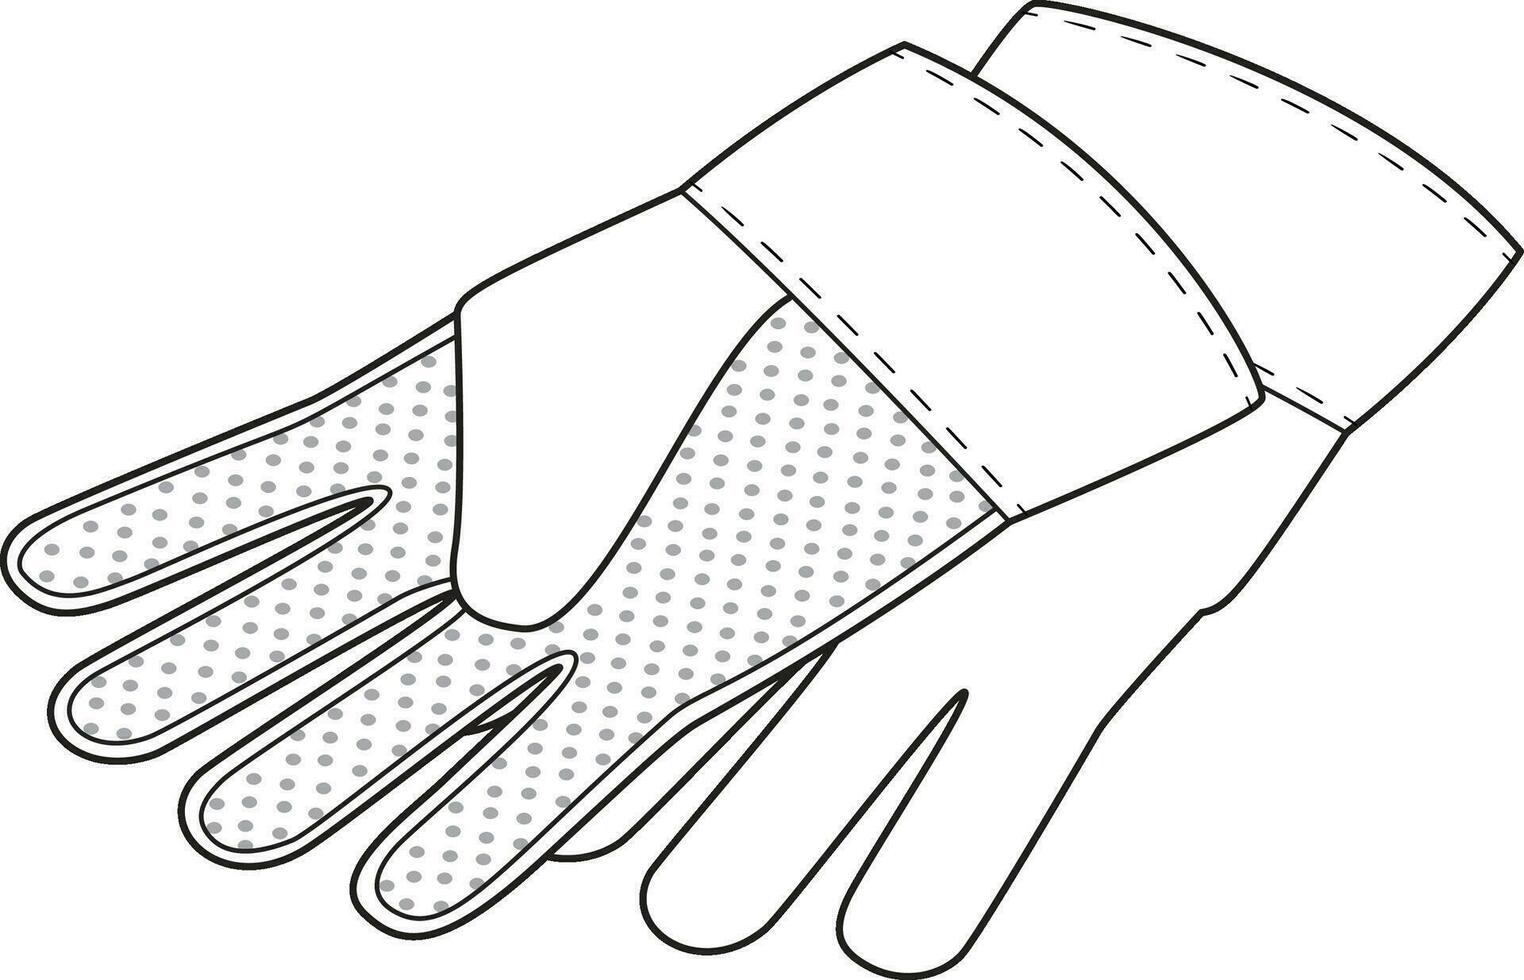 Gardening gloves outline icons. Black and white vector